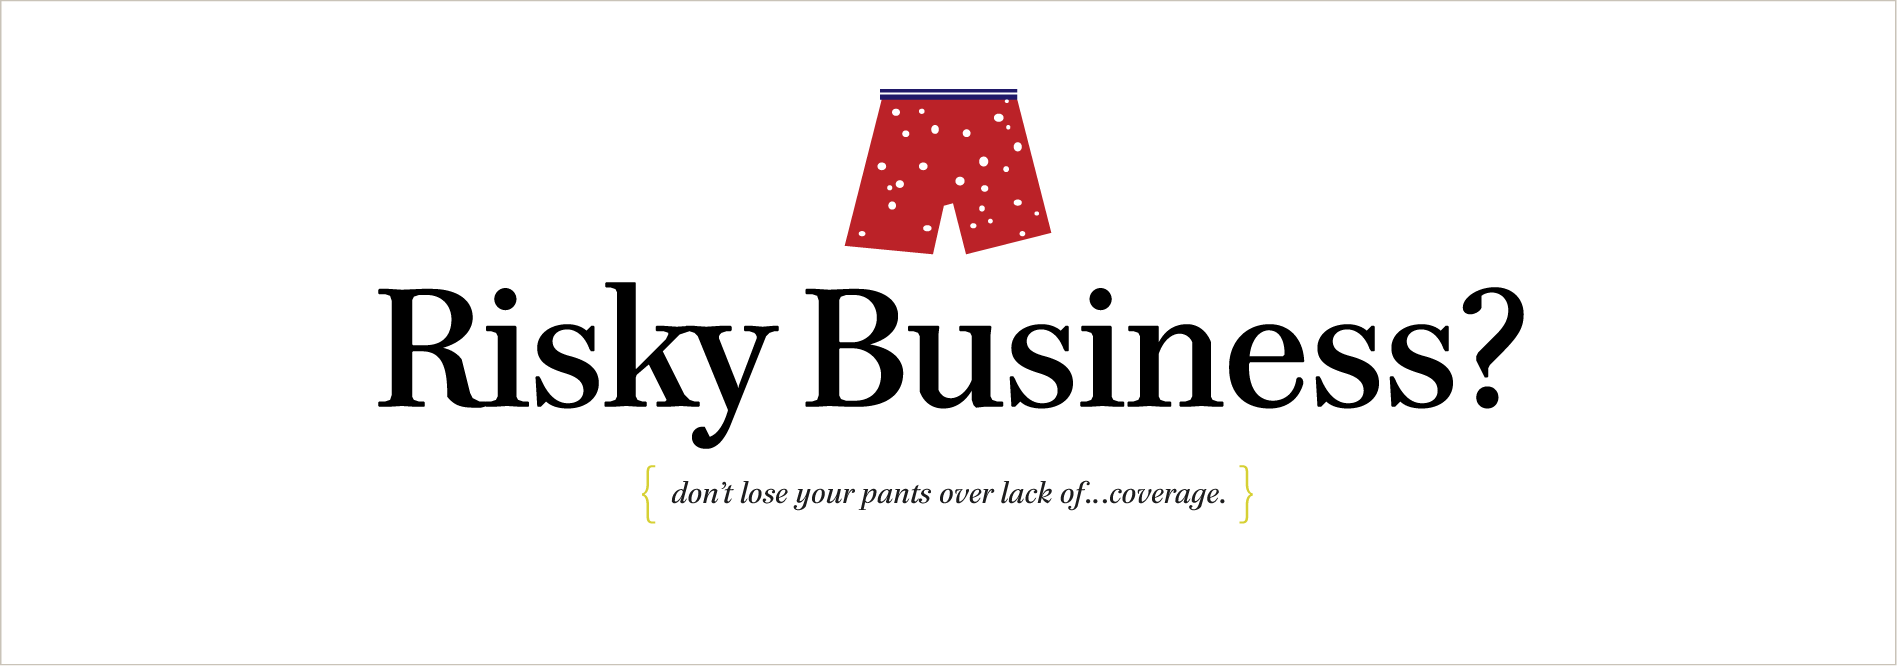 Business Insurance Ad